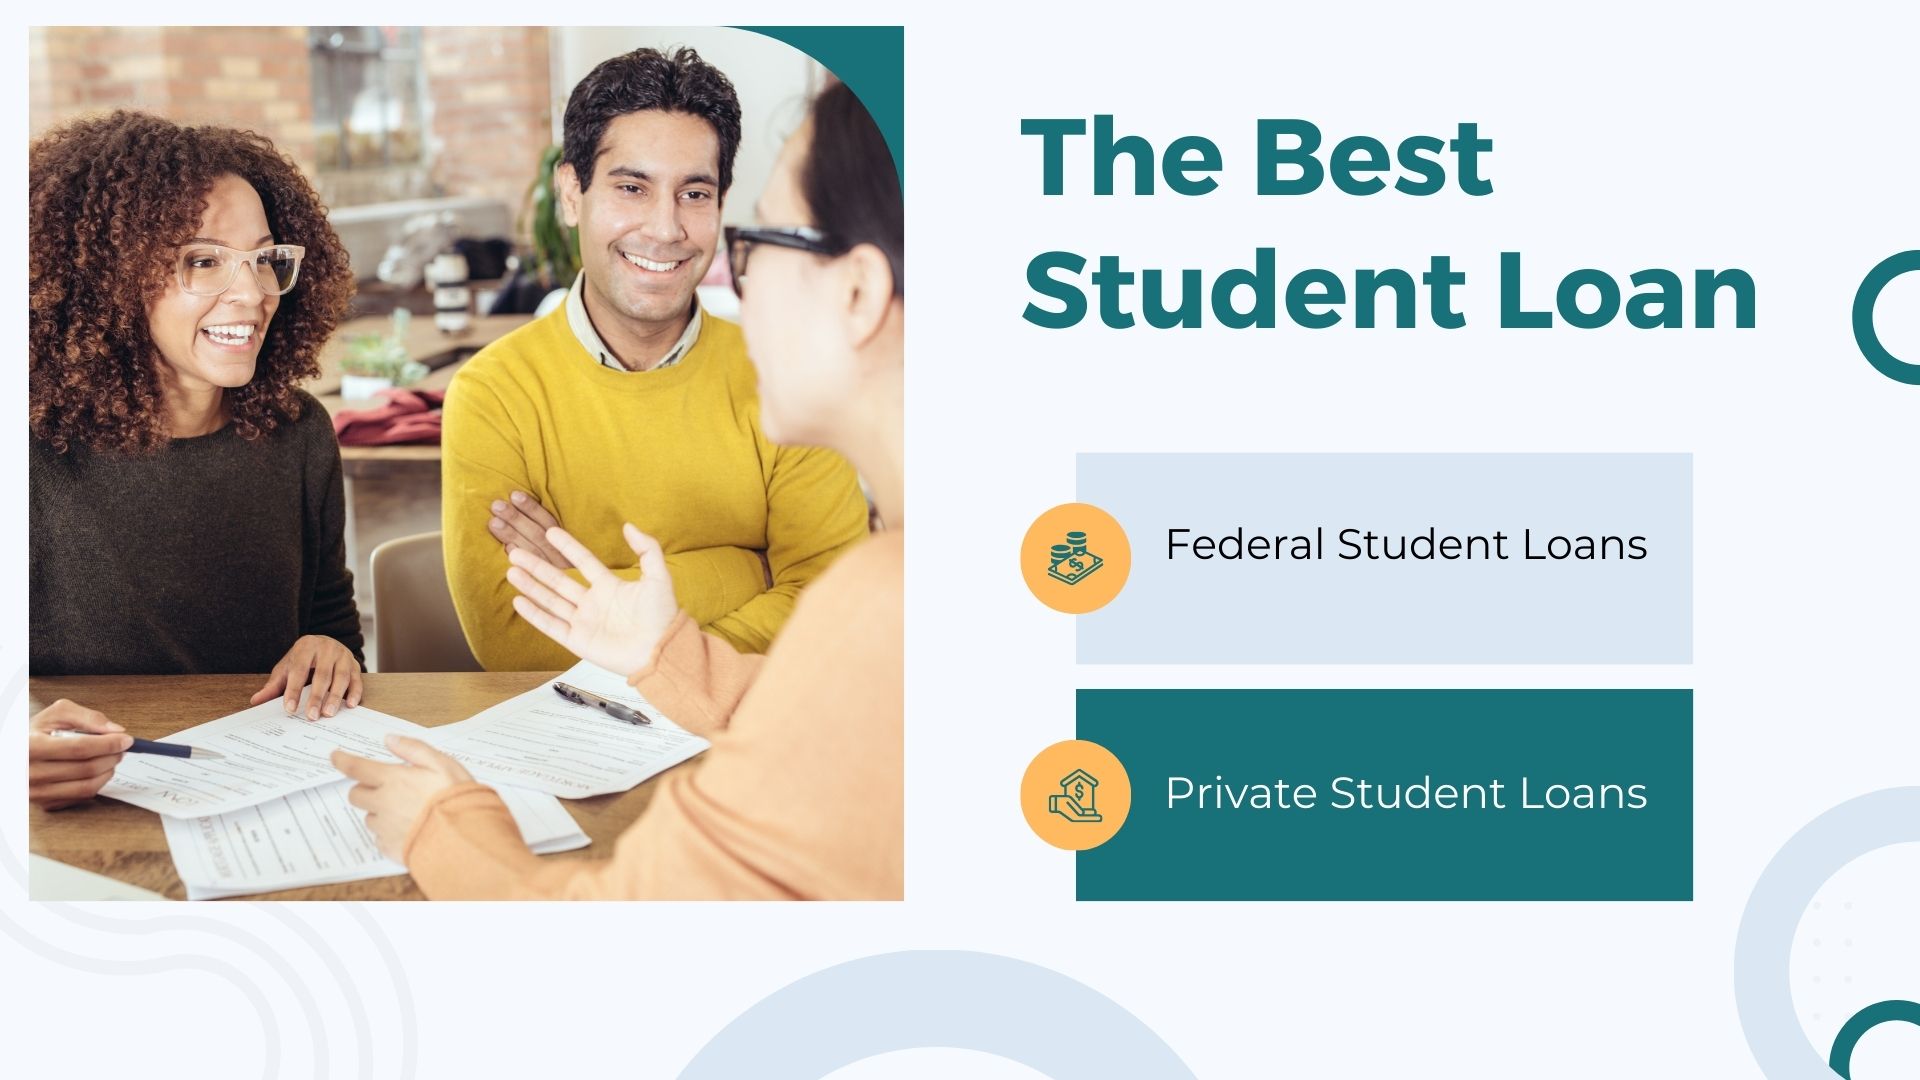 The Best Student Loan for You